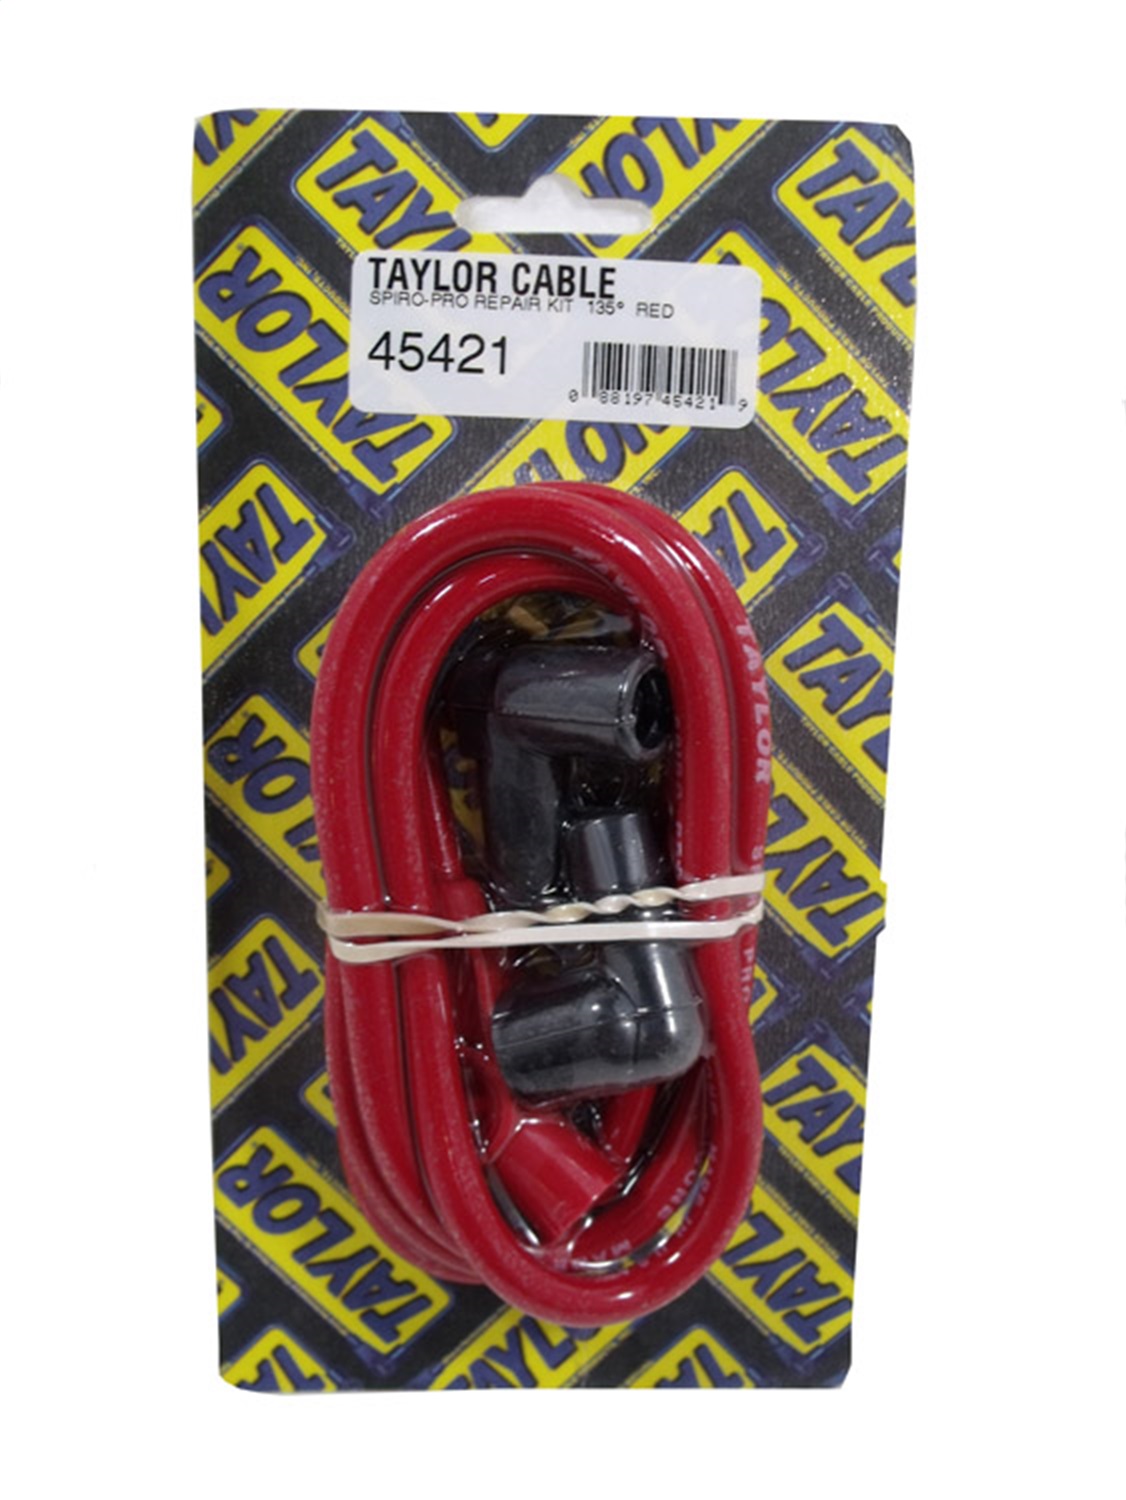 Taylor Cable Taylor Cable 45421 8mm Spiro Pro; Spark Plug Wire Repair Kit